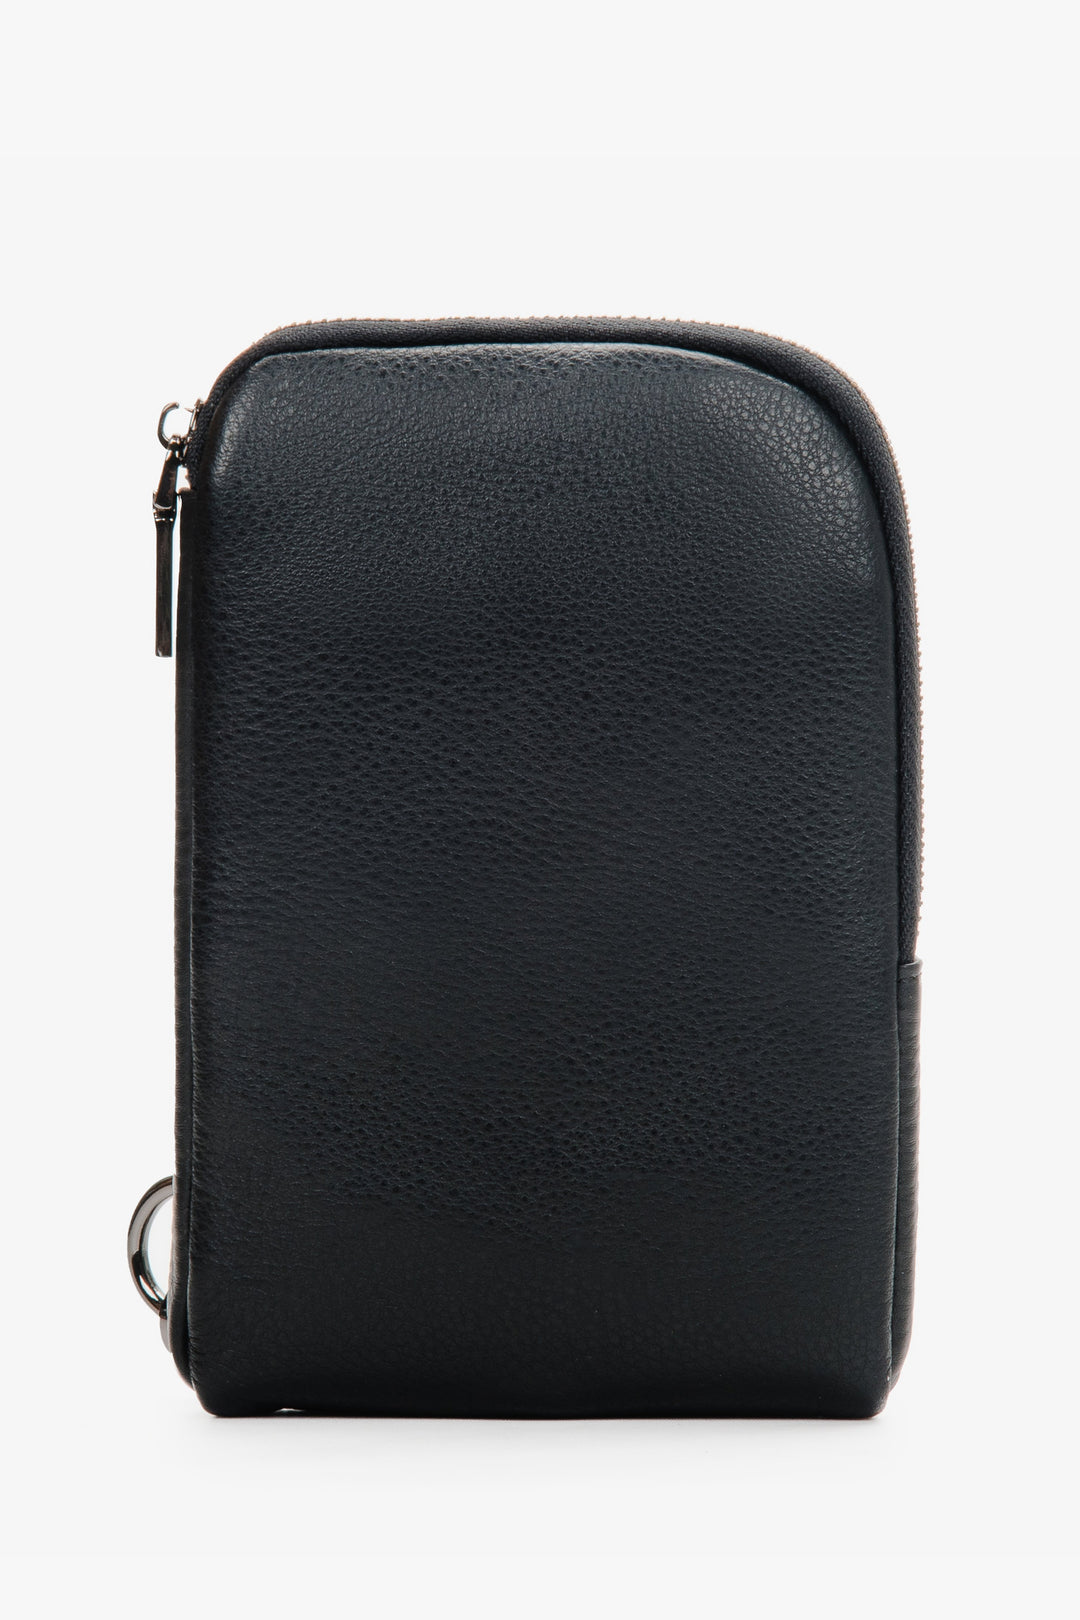 Men's black wallet made of genuine leather by Estro.